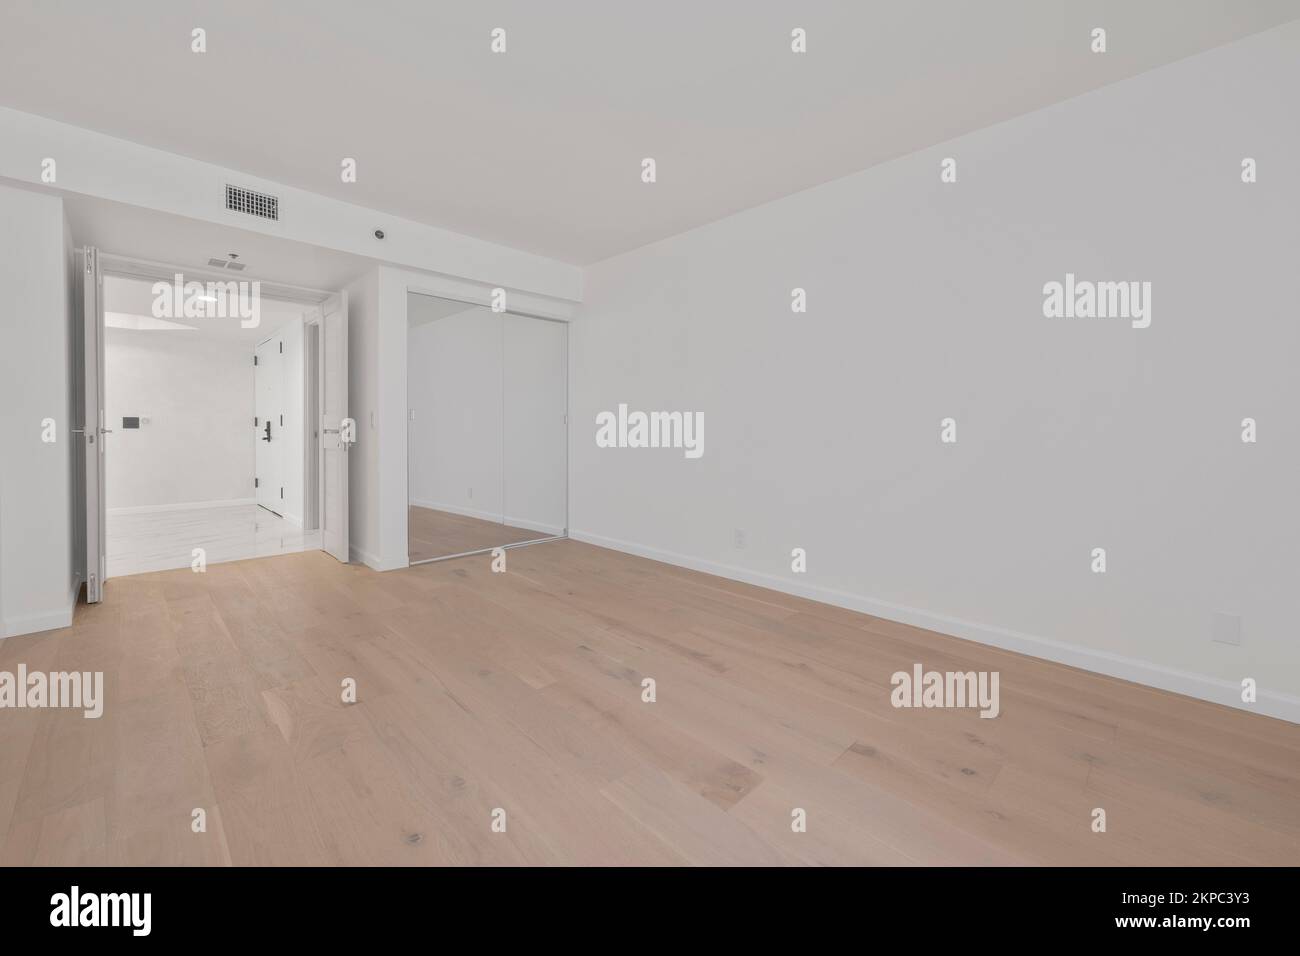 Small Bedroom With Mirror Wardrobe Stock Photo - Download Image Now - Mirror  - Object, Ceiling, Flooring - iStock